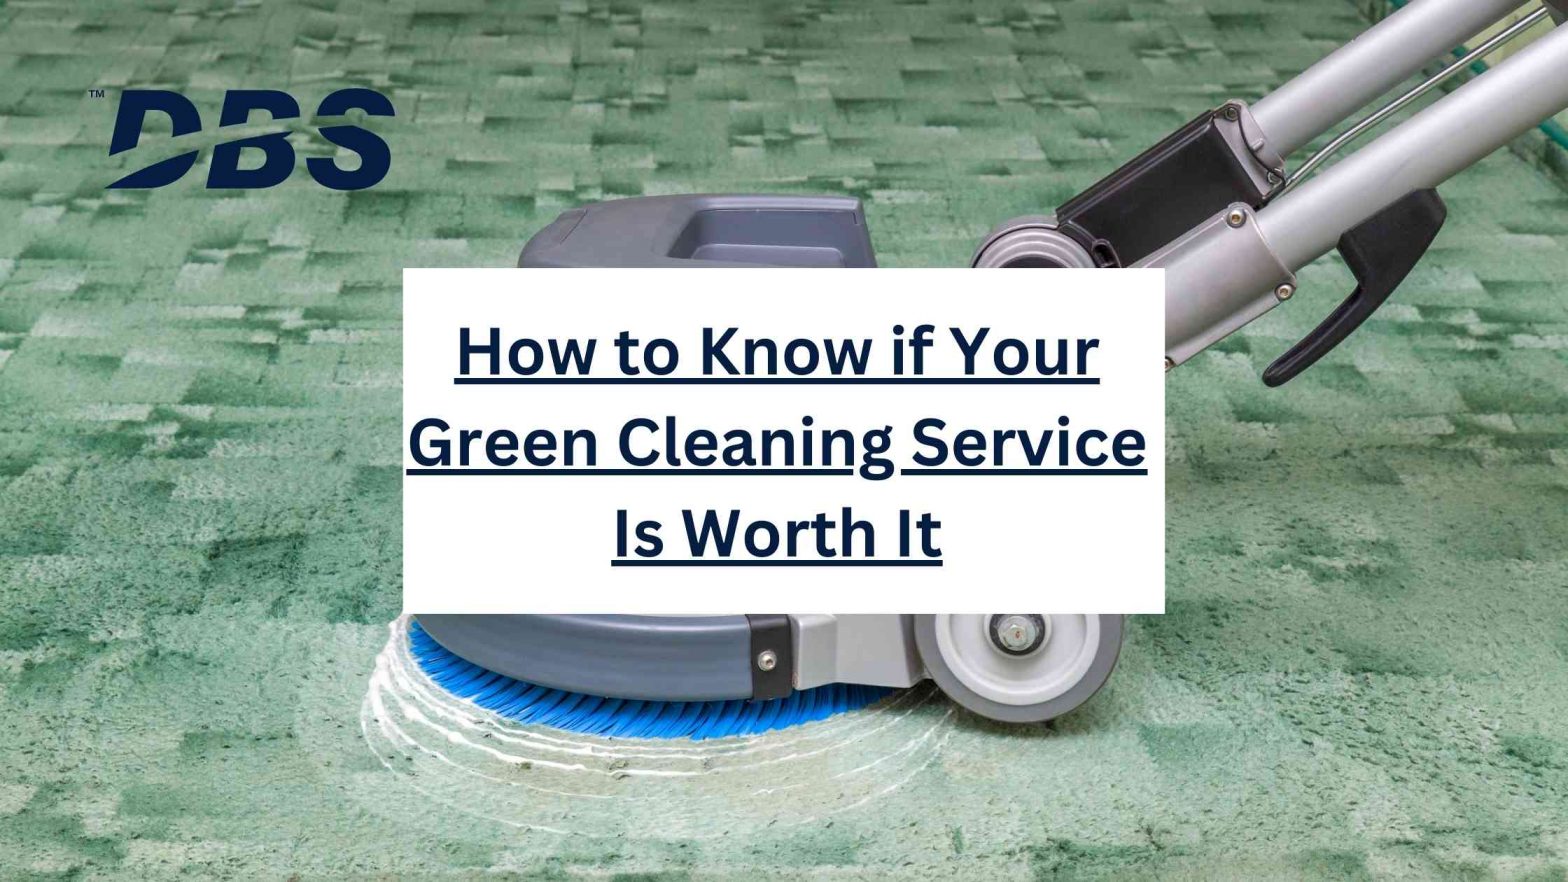 Green Cleaning Service Is Worth It